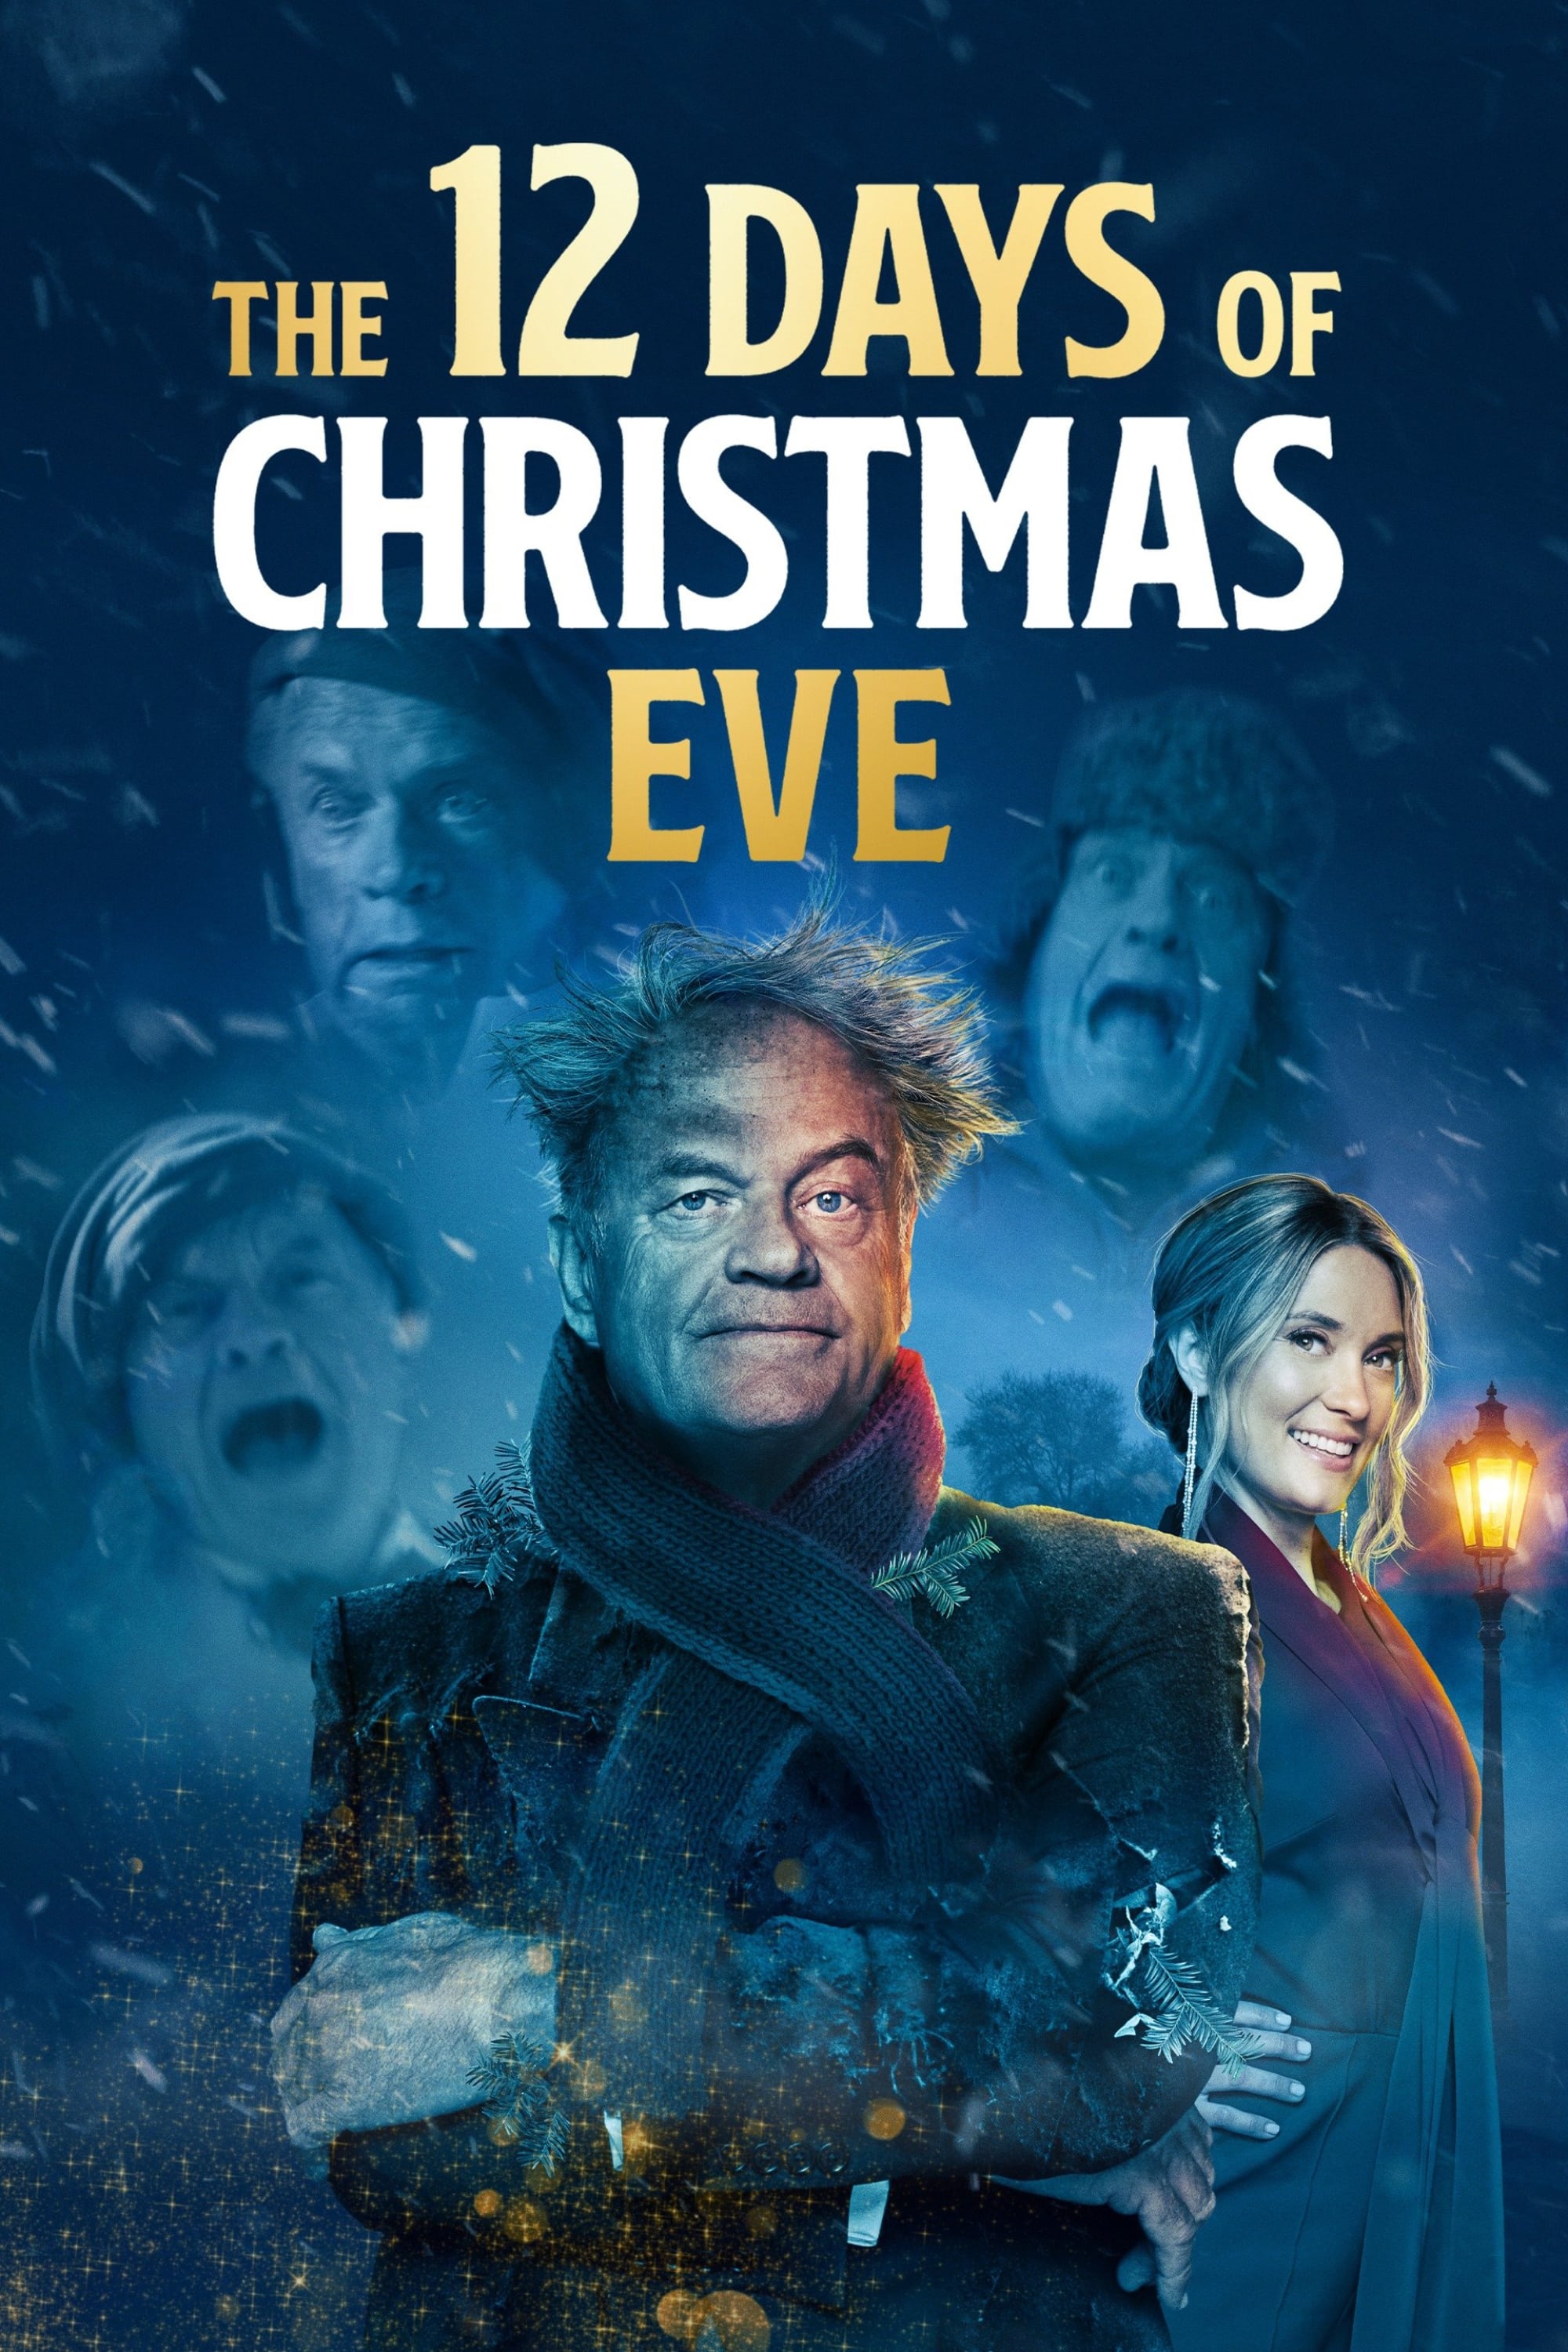 The 12 Days of Christmas Eve film